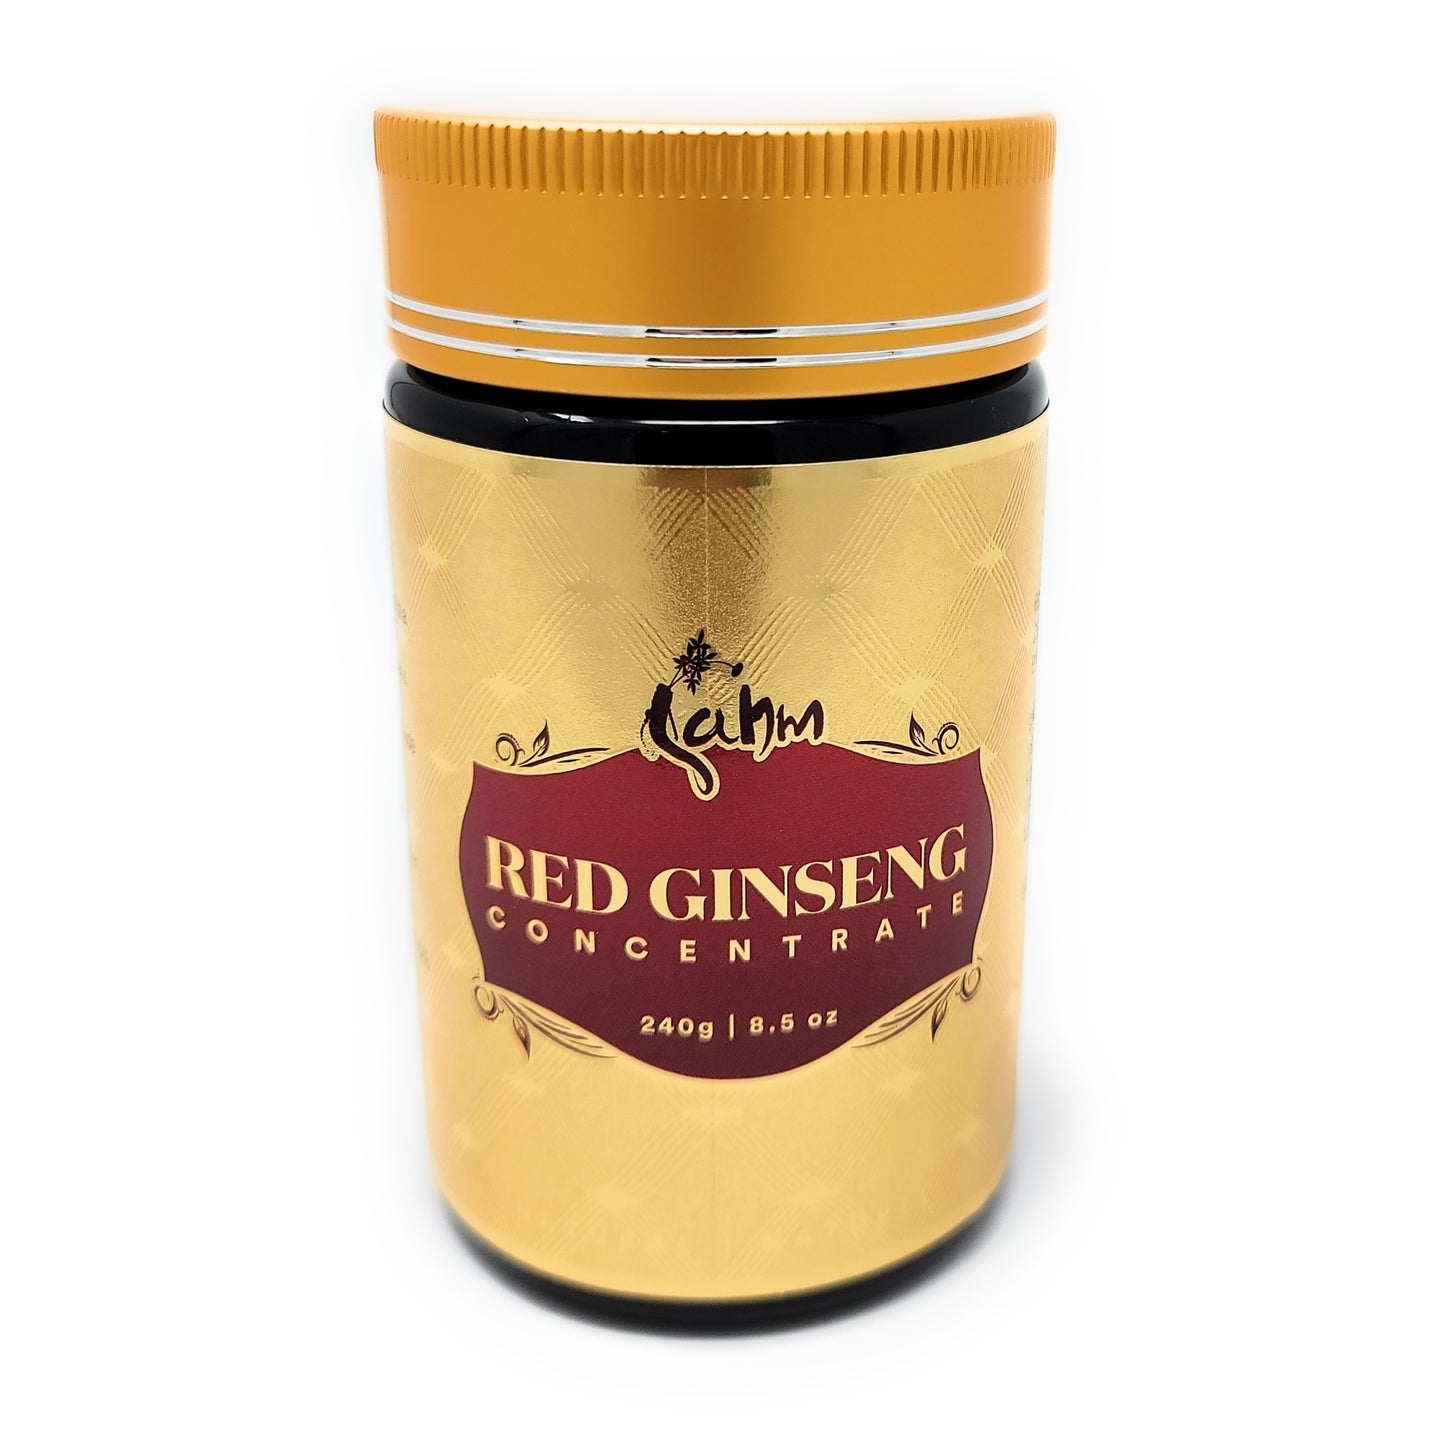 Canadian (Ontario) Red Ginseng Extract 240g | 6-Year-Old Red Ginseng Root Extract